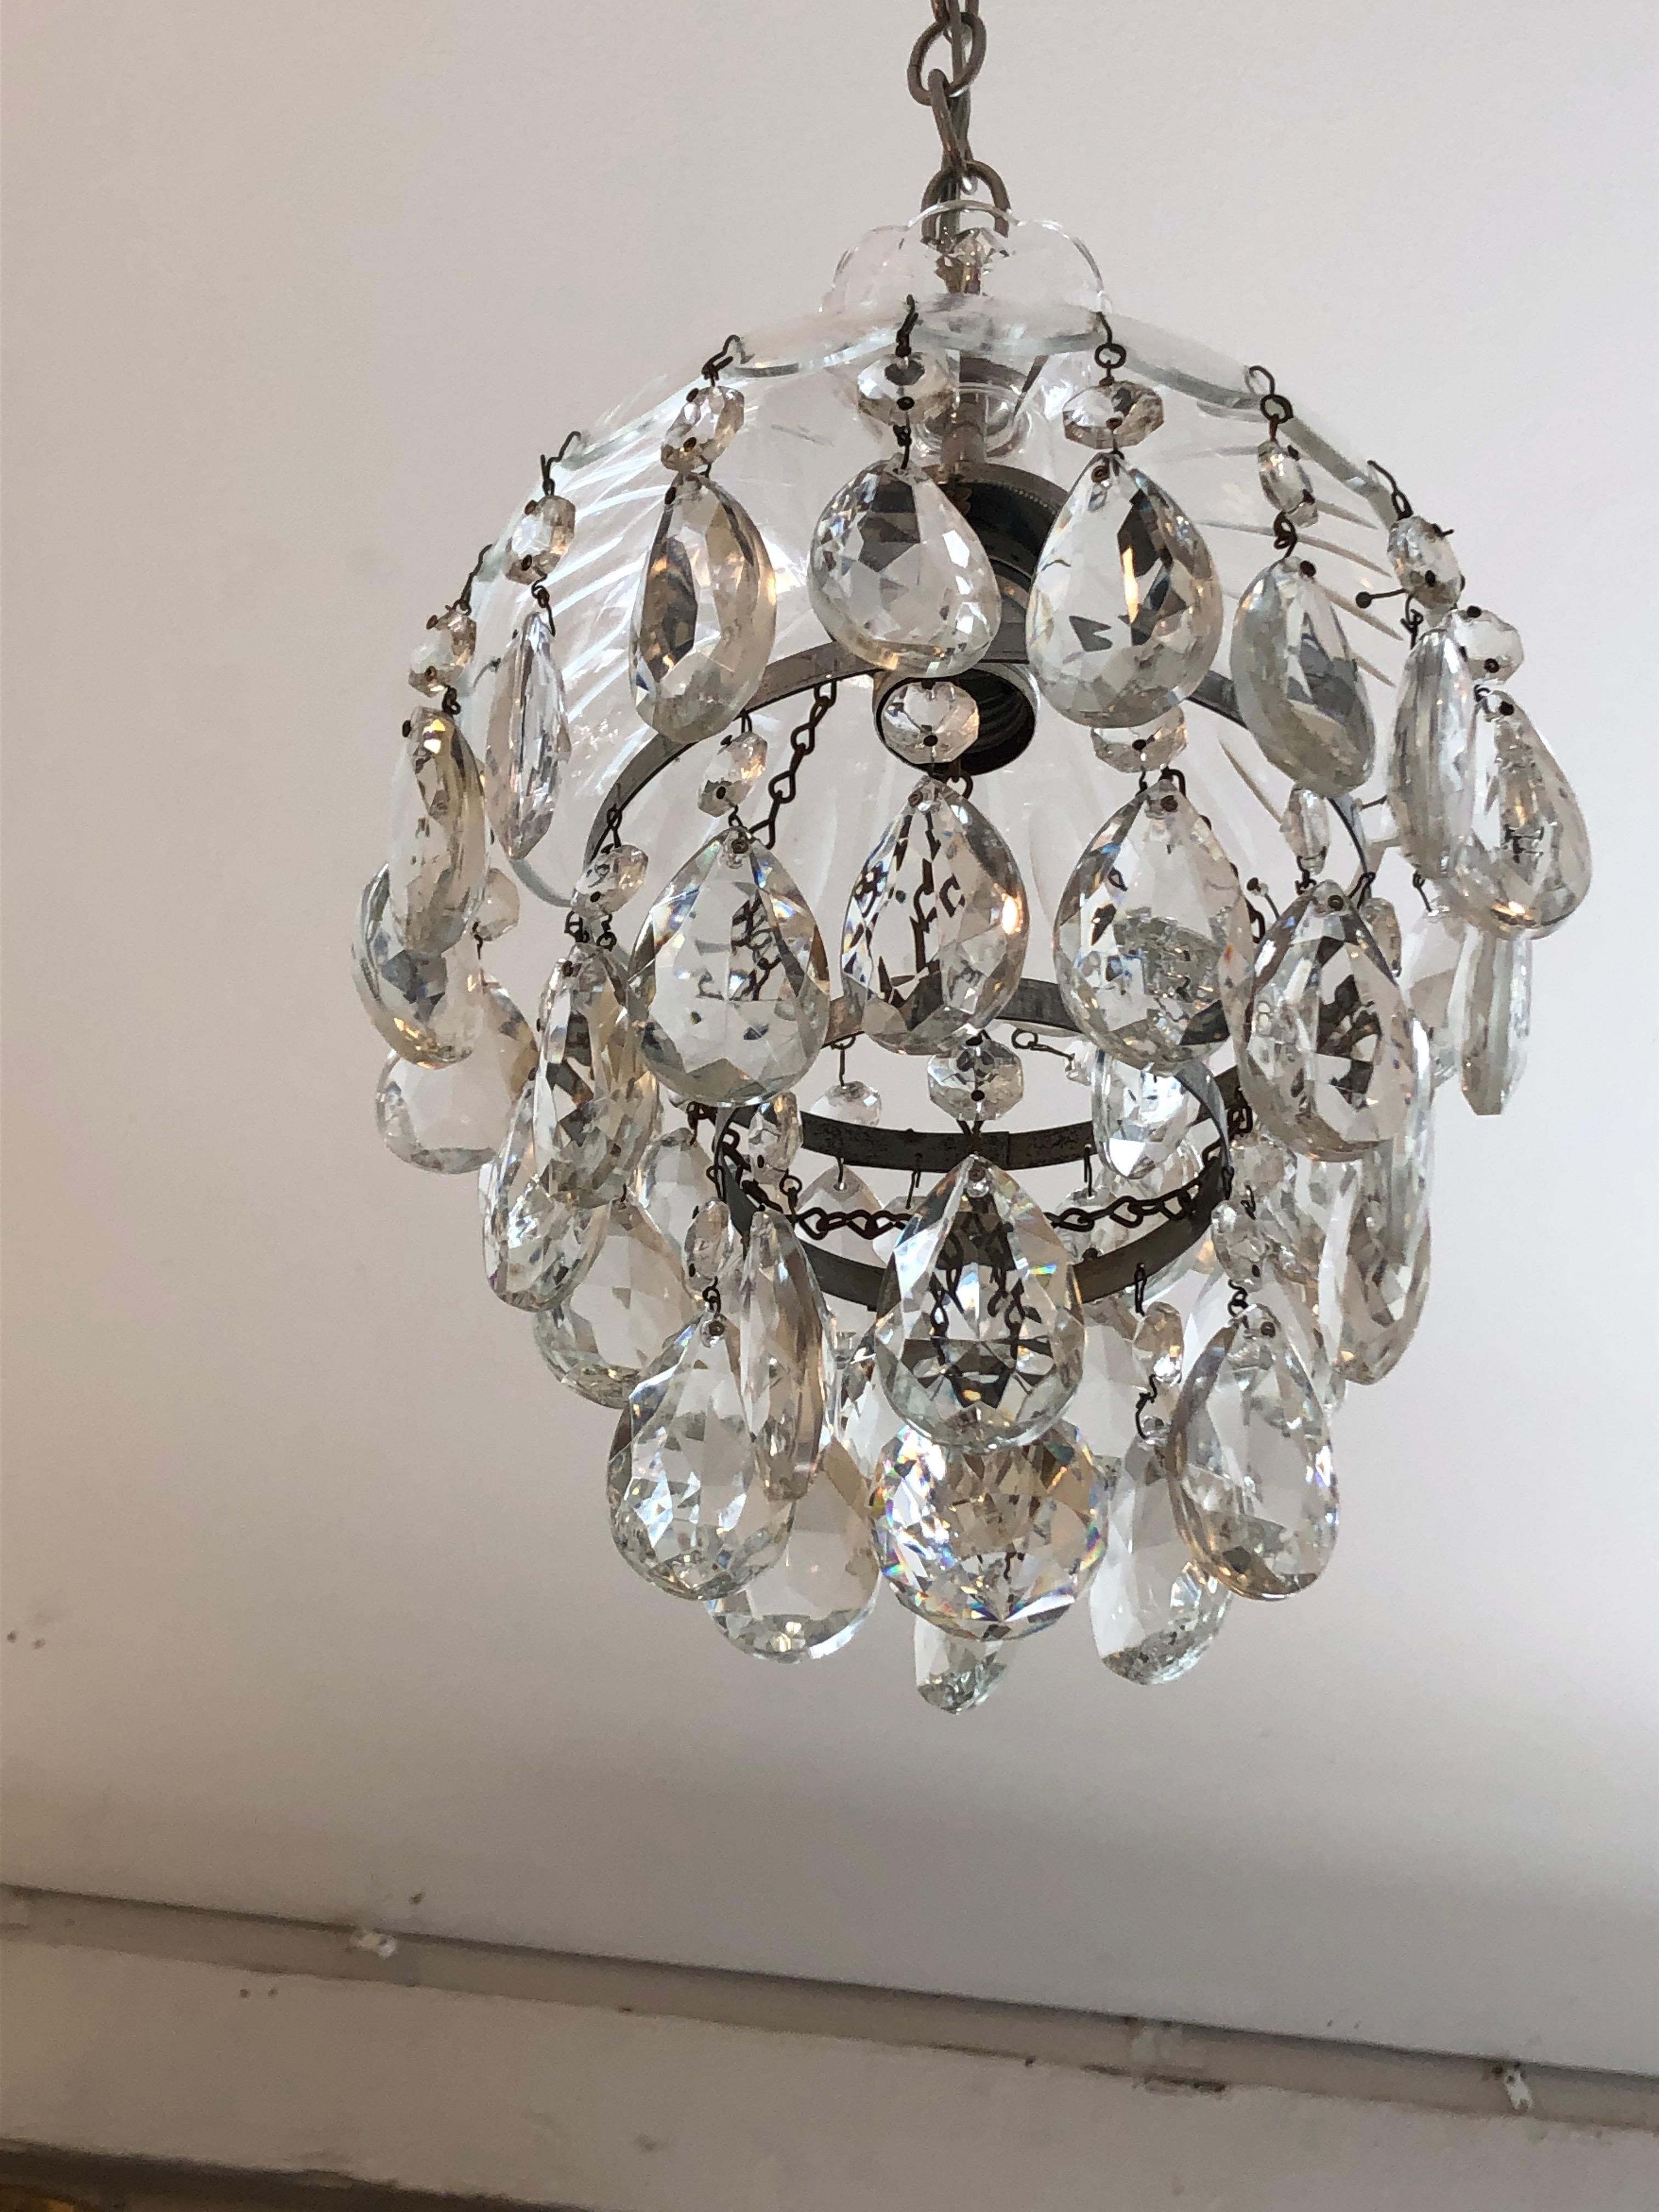 A very pretty small sized pair of glamorous pendant chandeliers having cut glass dome shaped tops and 3 levels of dripping tear drop crystals and a round crystal ball at the bottom.